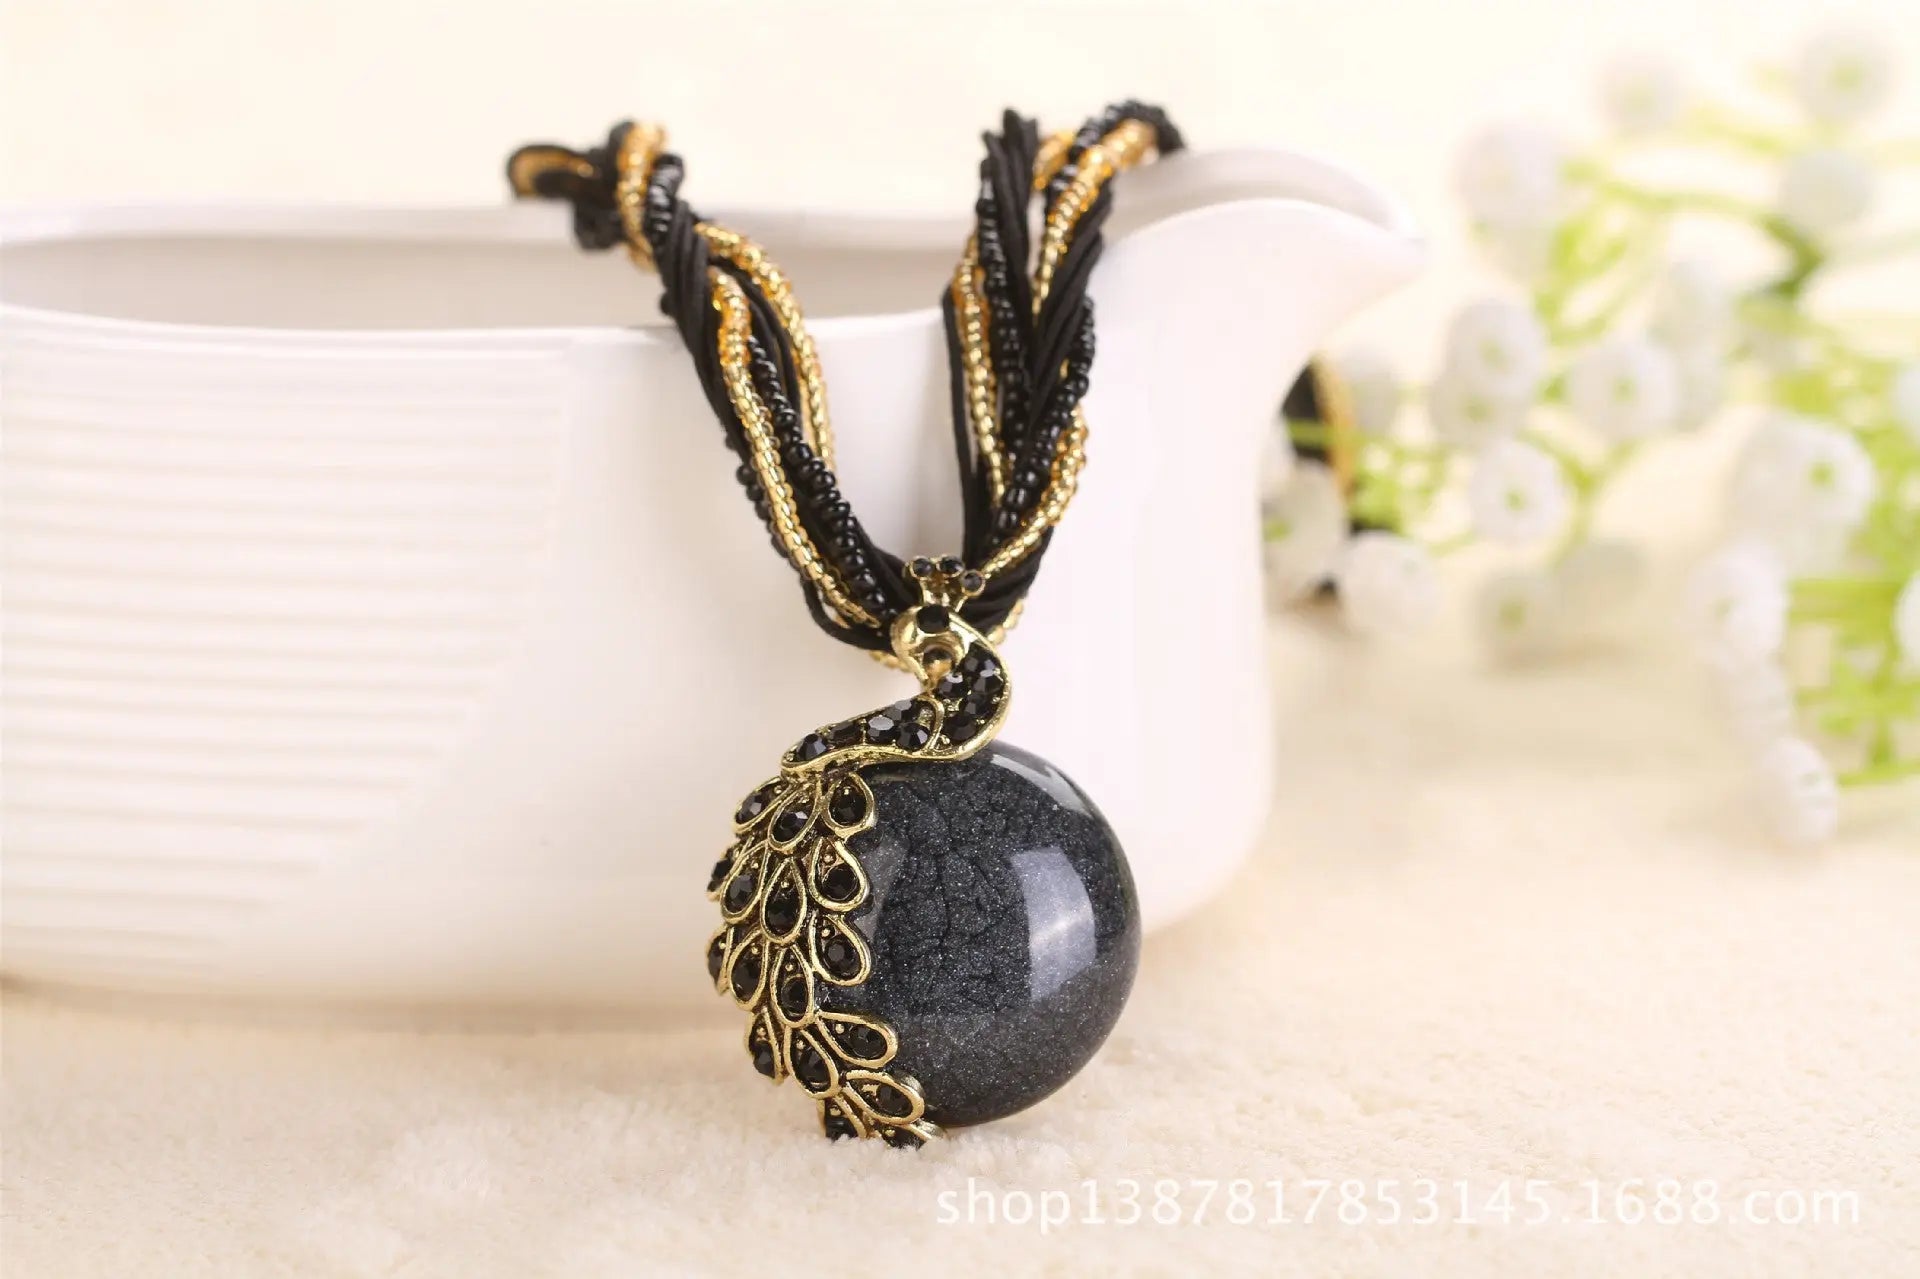 Boho Ethnic Jewelry Choker Handmade Pendant Necklace Natural Stone Bead Peacock Statement Maxi Necklace for Women Girls Gifts - Trending's Arena Beauty Boho Ethnic Jewelry Choker Handmade Pendant Necklace Natural Stone Bead Peacock Statement Maxi Necklace for Women Girls Gifts Electronics Facial & Neck black